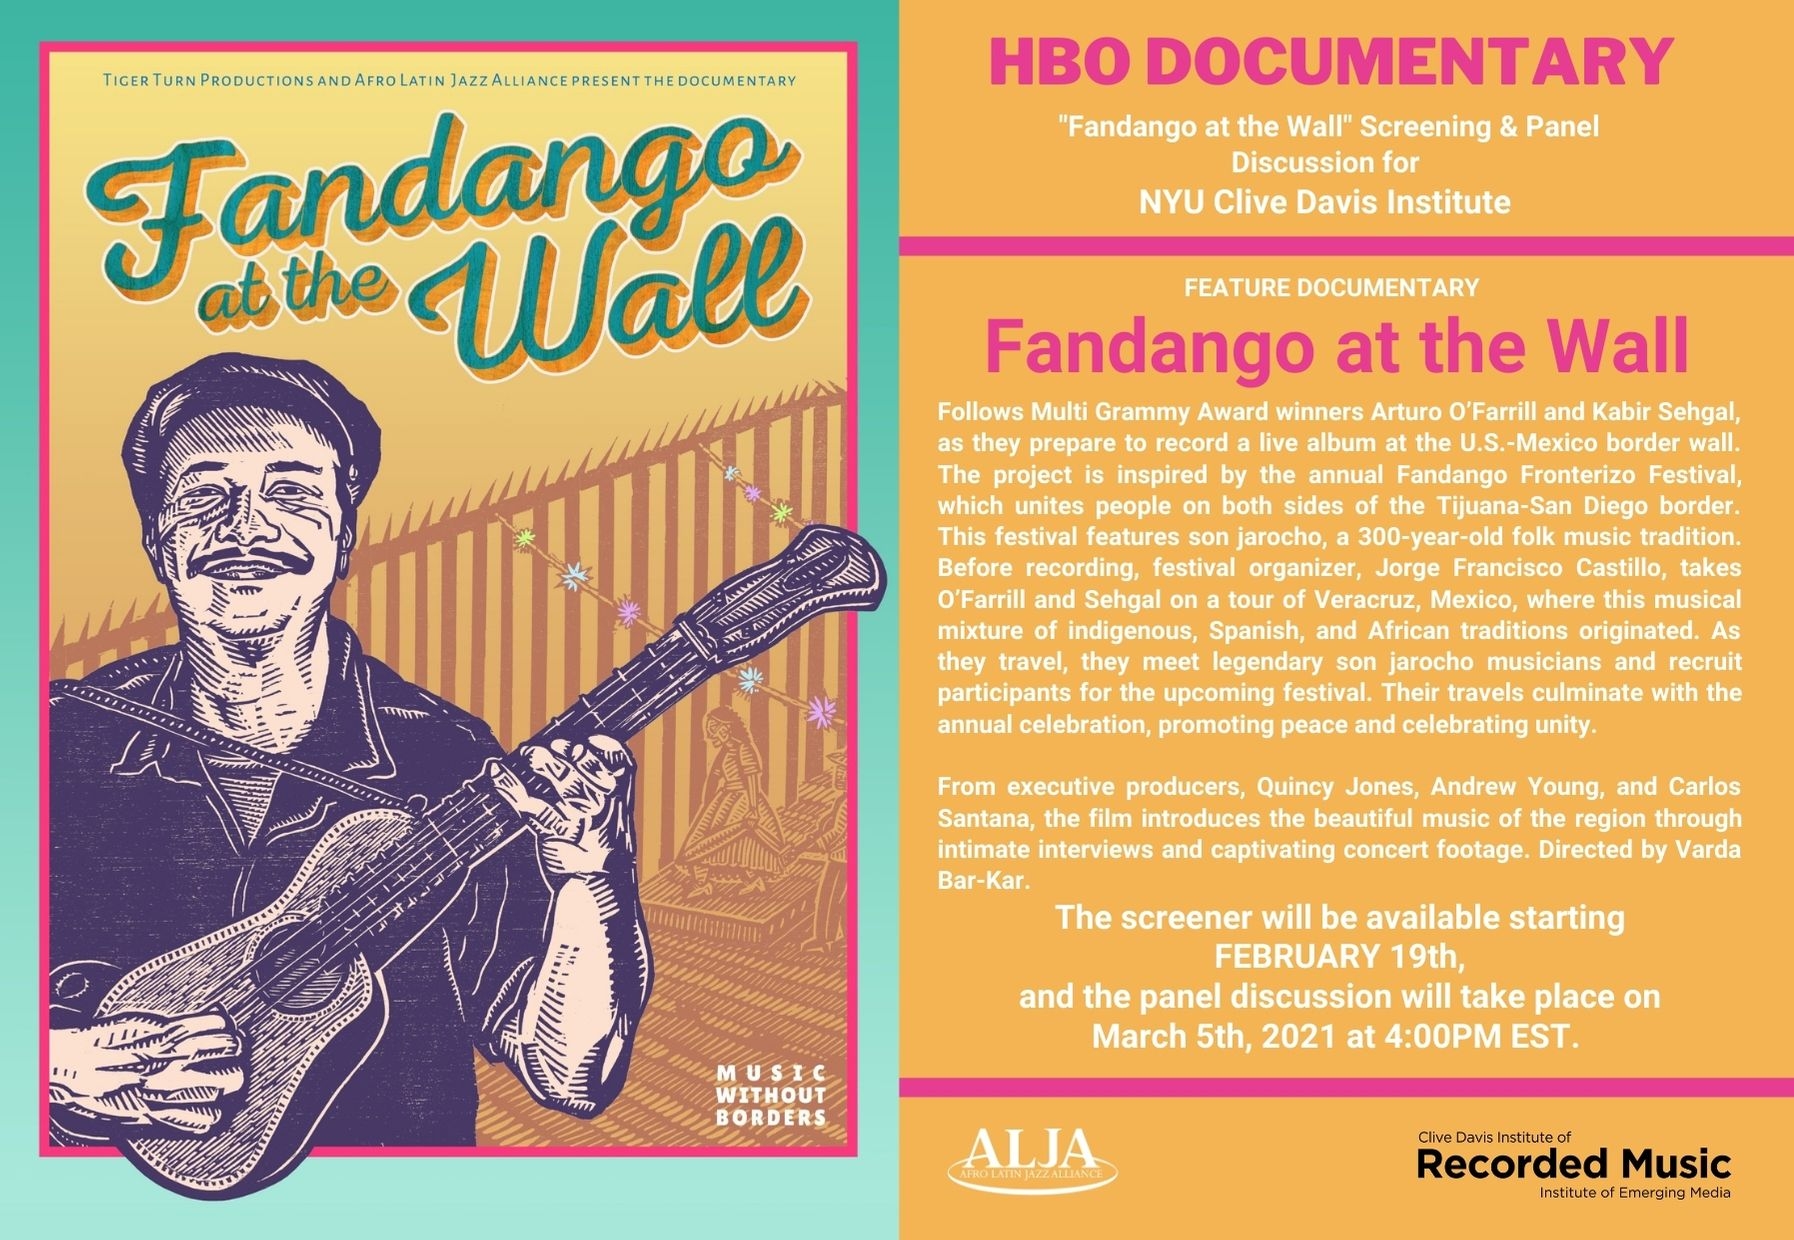 FANDANGO AT THE WALL Screening & Panel Discussion